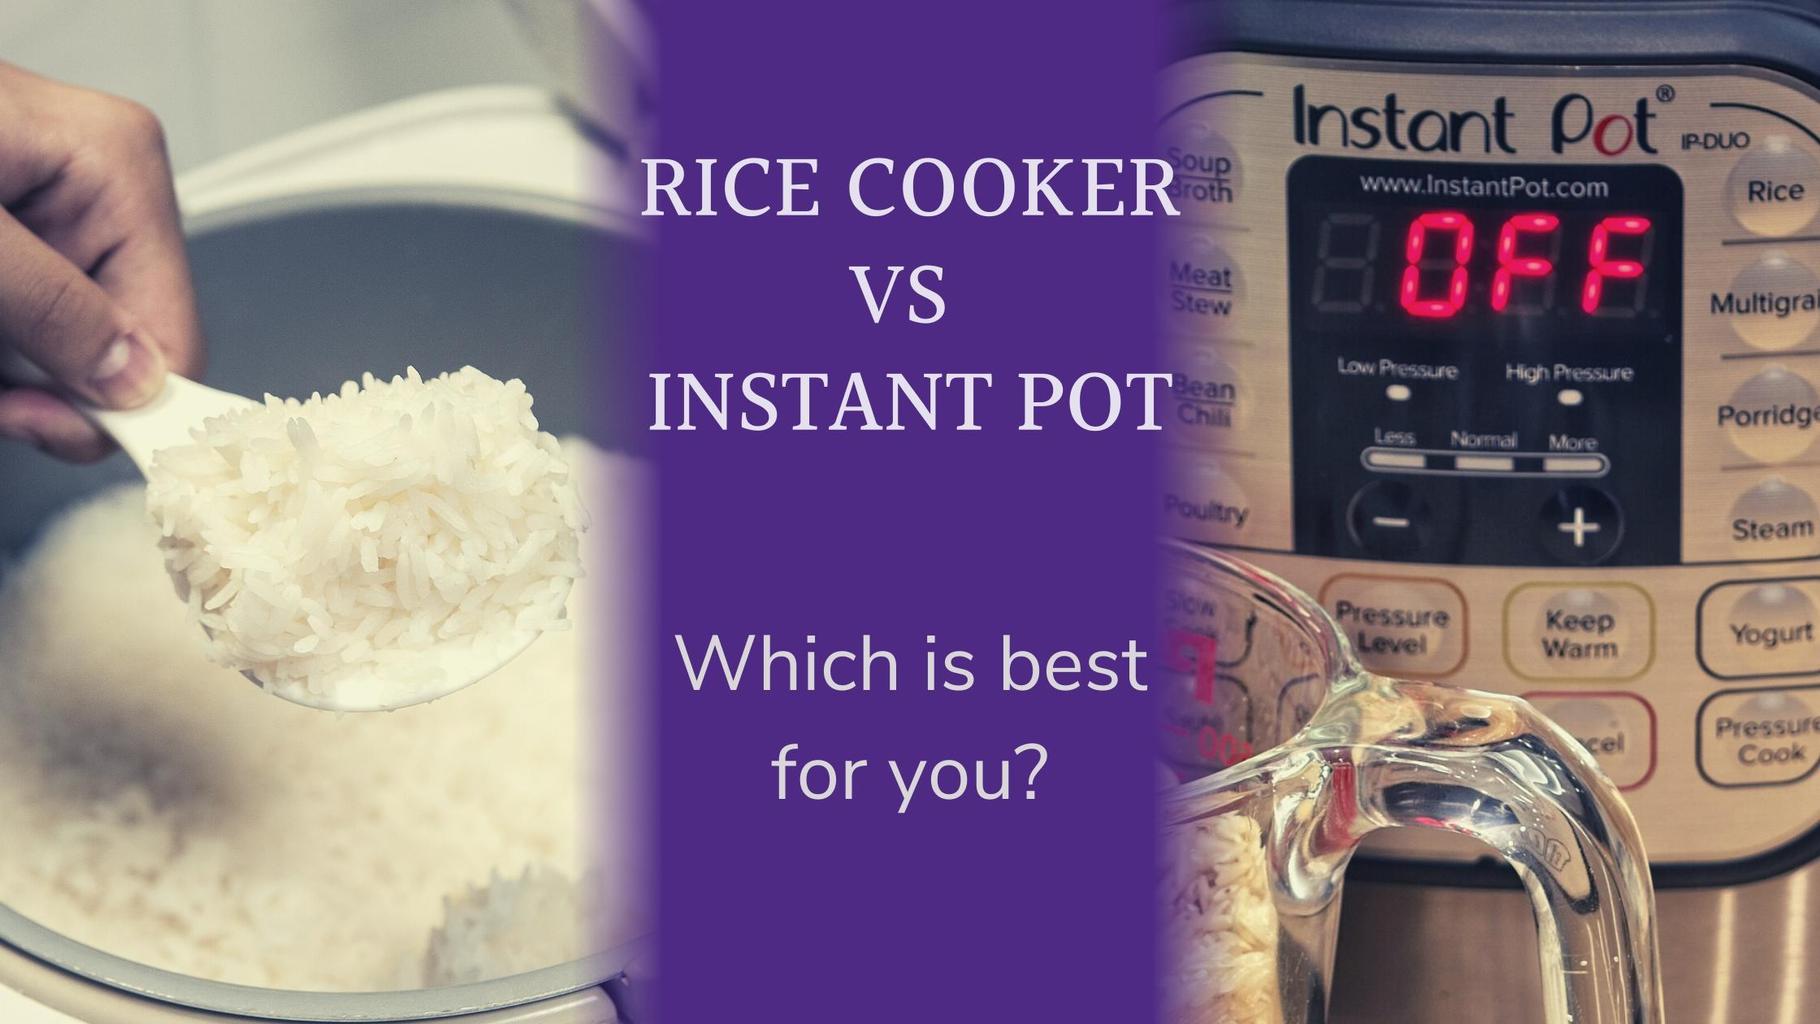 Instant Pot Vs. Rice Cooker: Which Is Best?